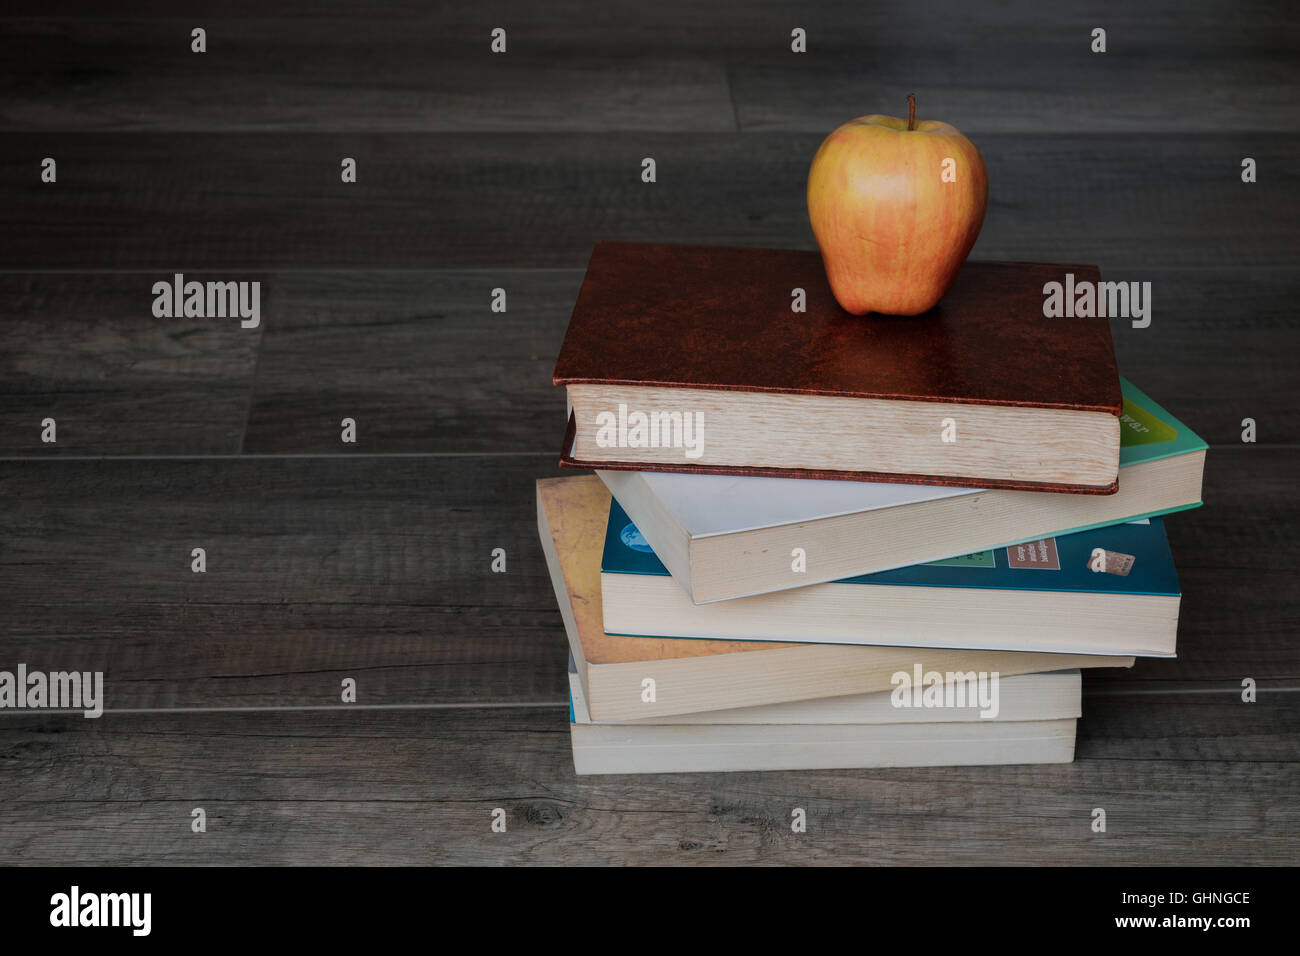 A pile of books with an apple on top on the wooden background Stock Photo